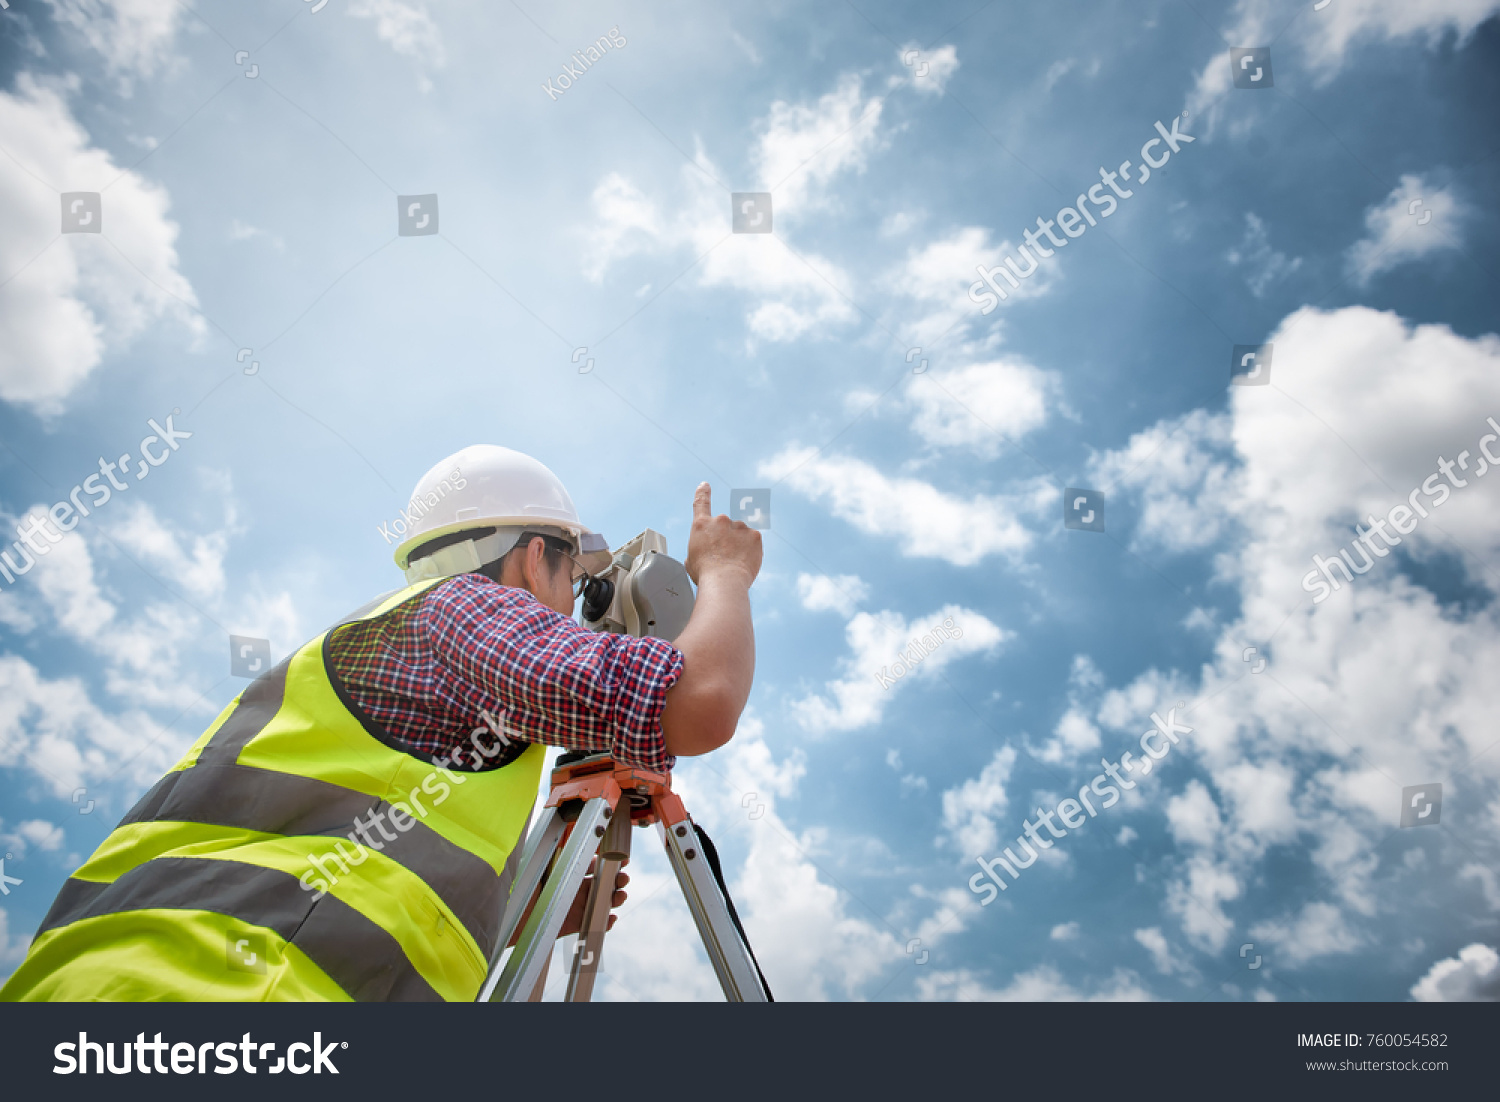 Surveyor equipment. Surveyor’s telescope at construction site or Surveying for making contour plans are a graphical representation of the lay of the land before startup construction work  #760054582